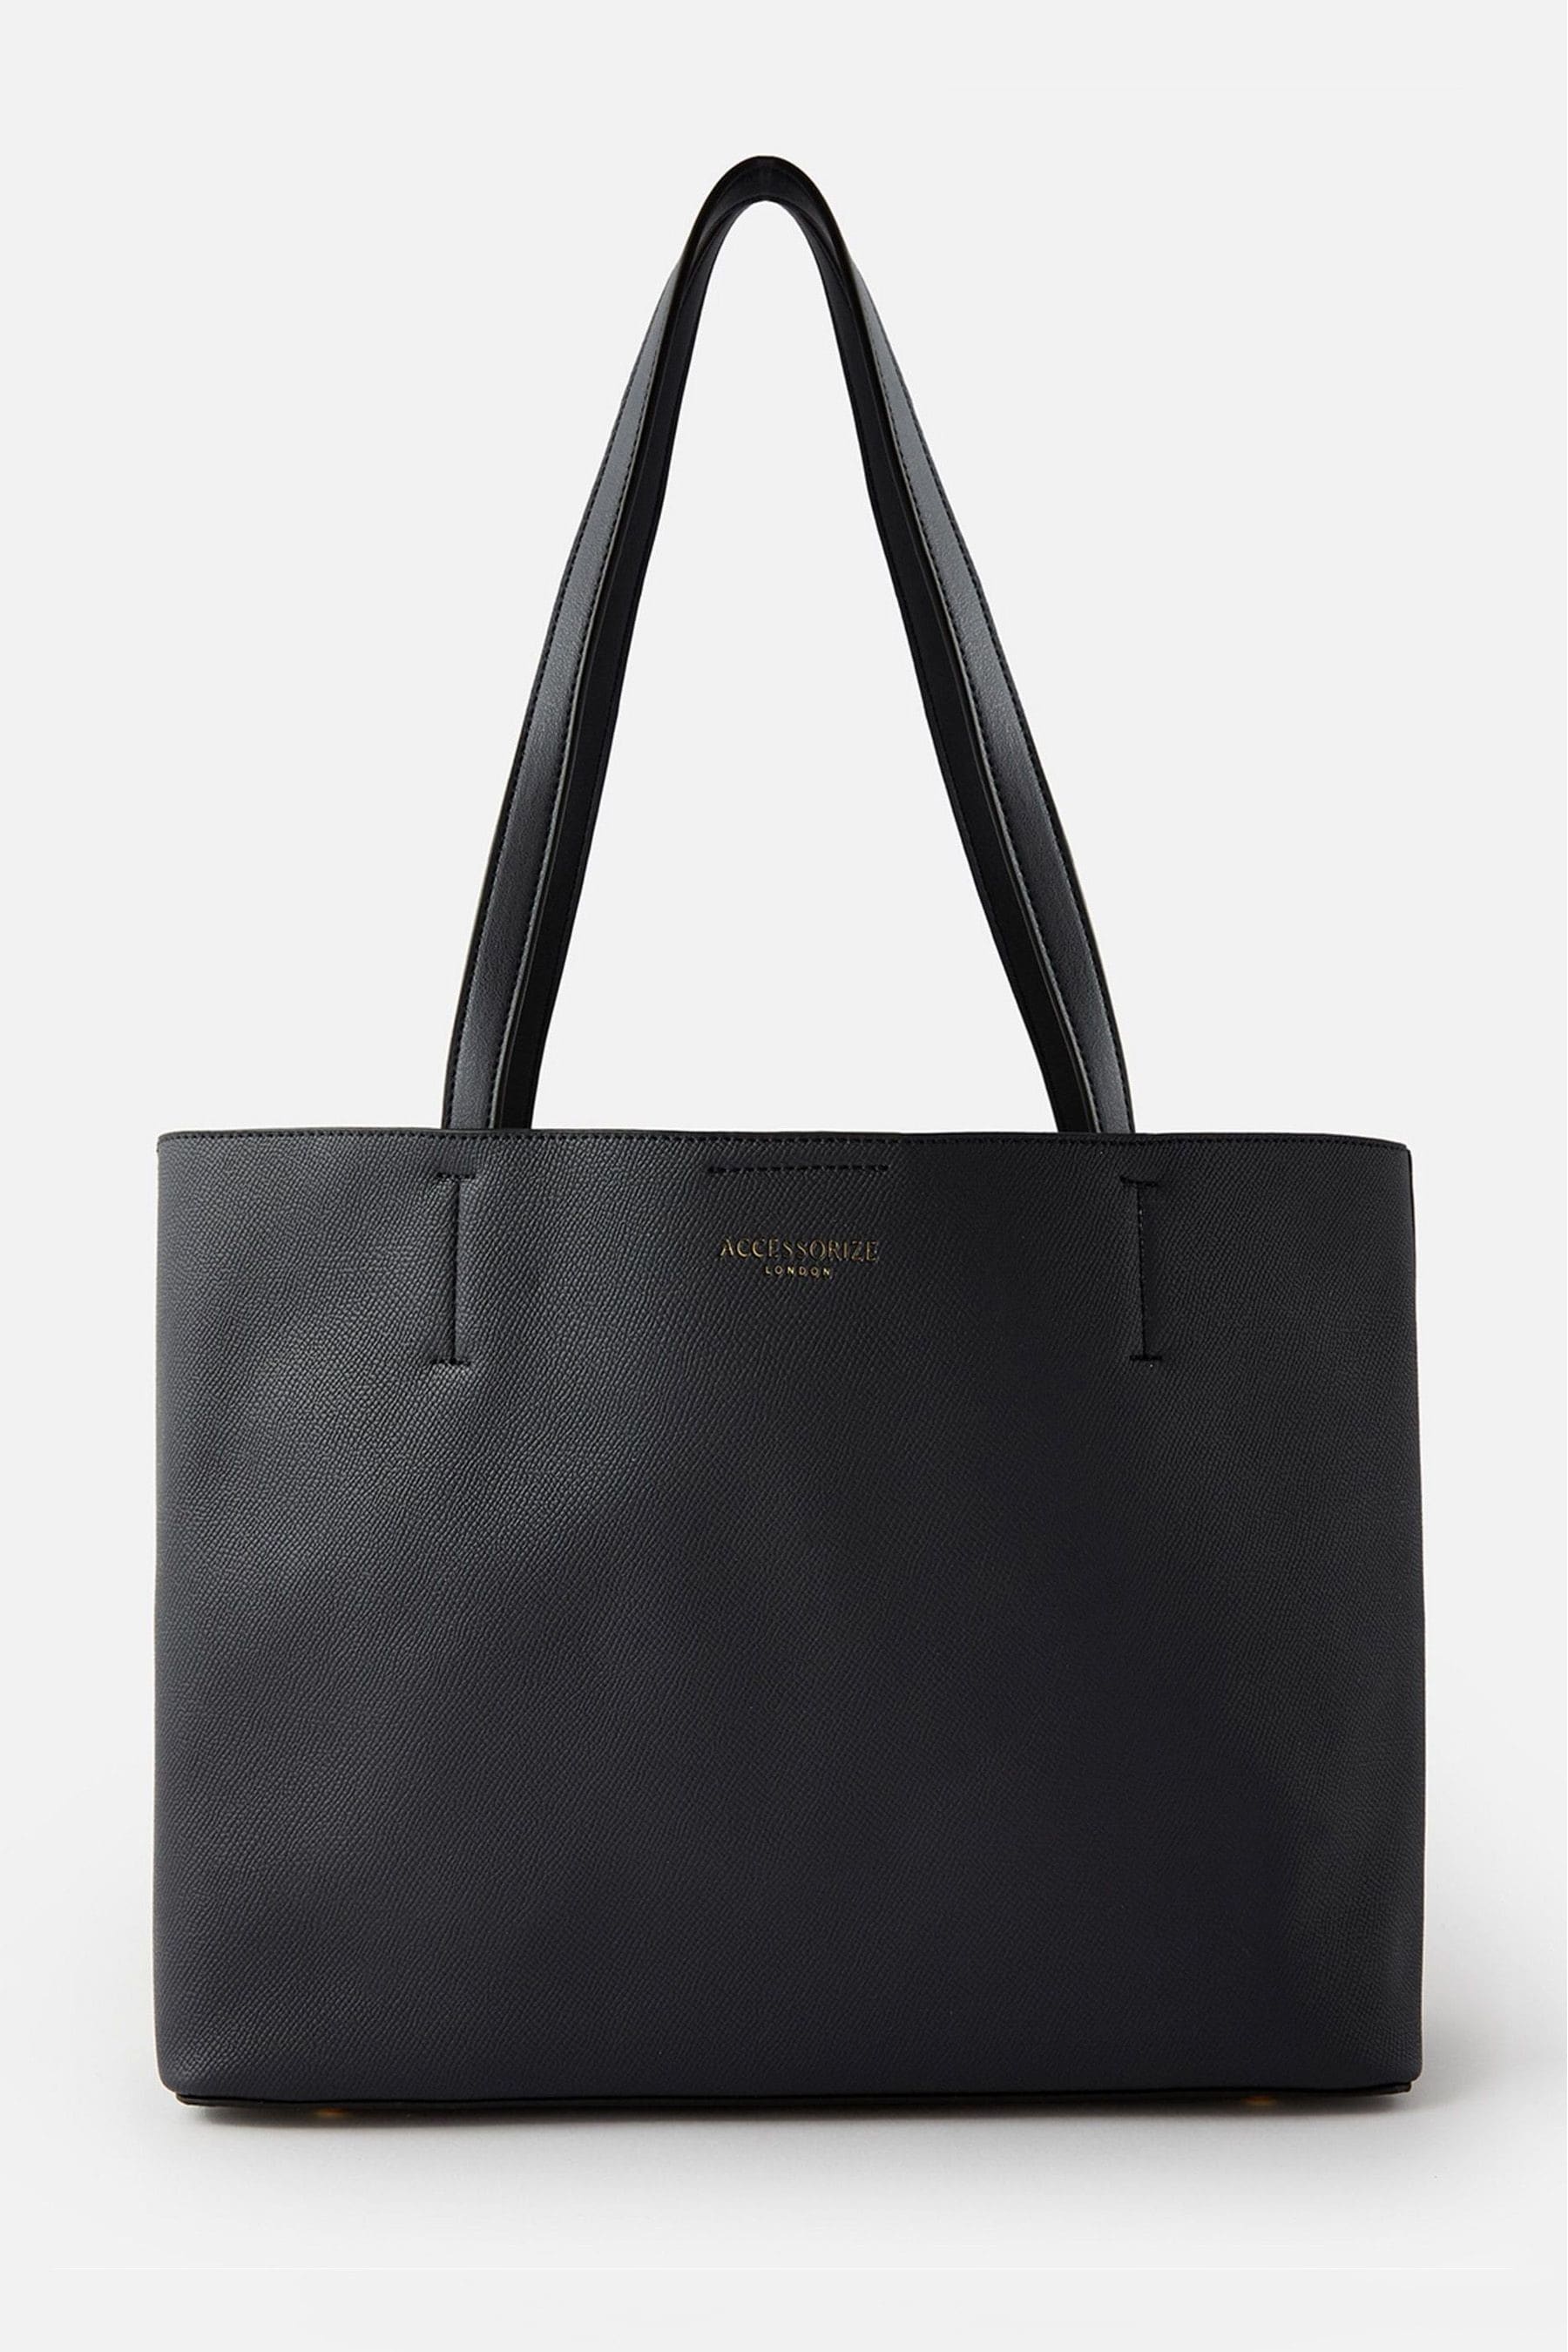 Buy Accessorize Black Leo Tote Bag from the Next UK online shop